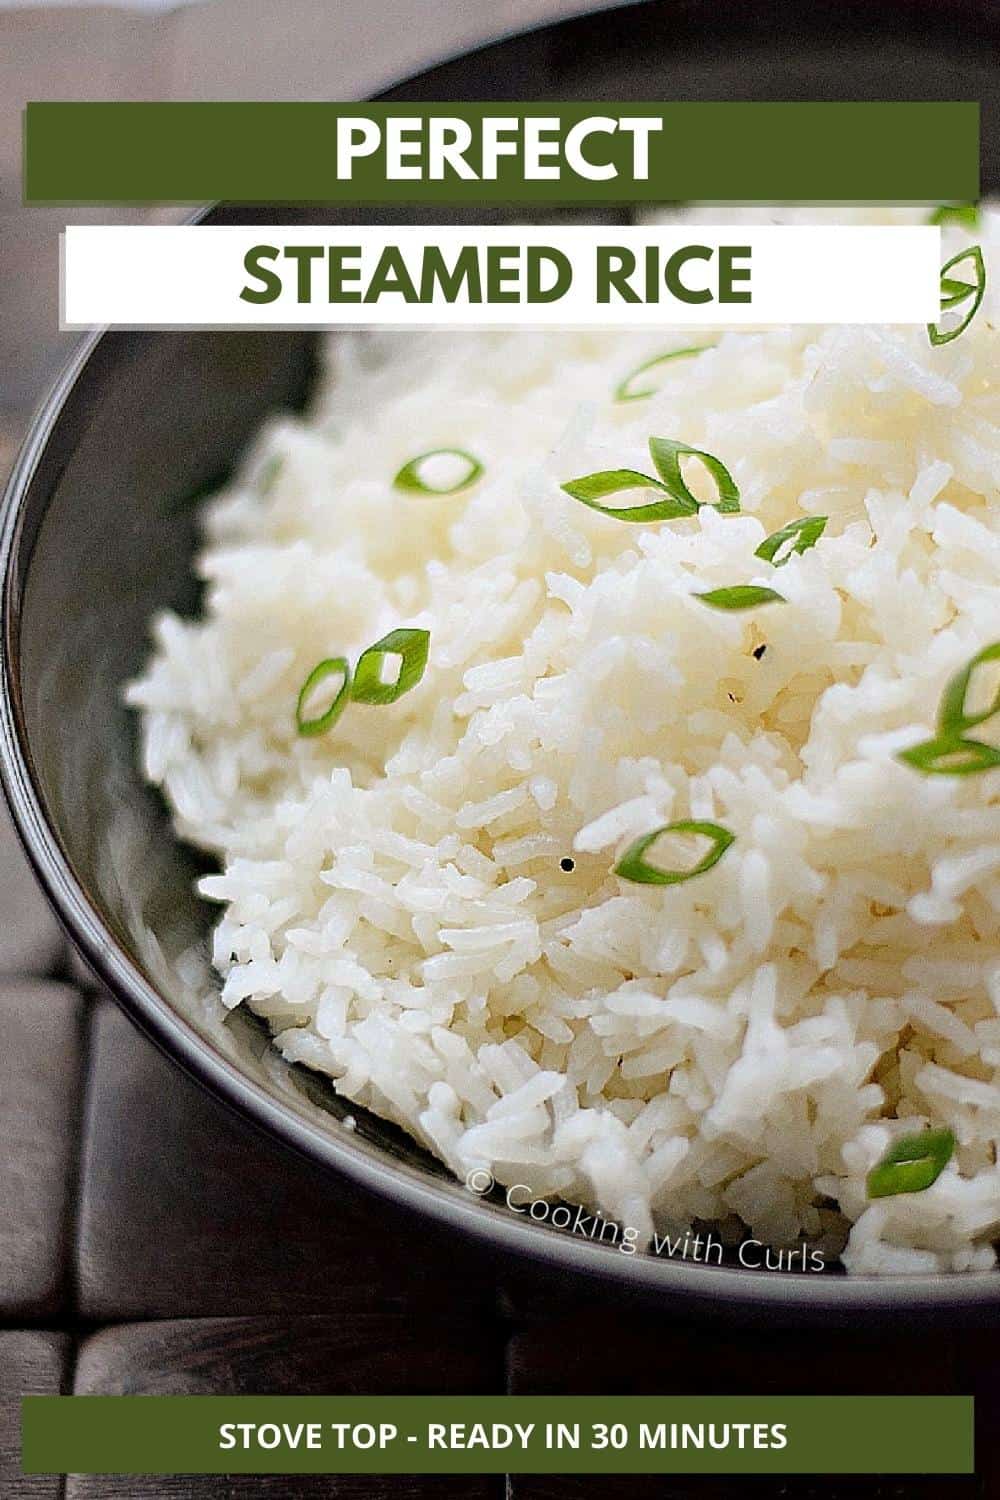 Perfect Steamed Rice - Cooking with Curls